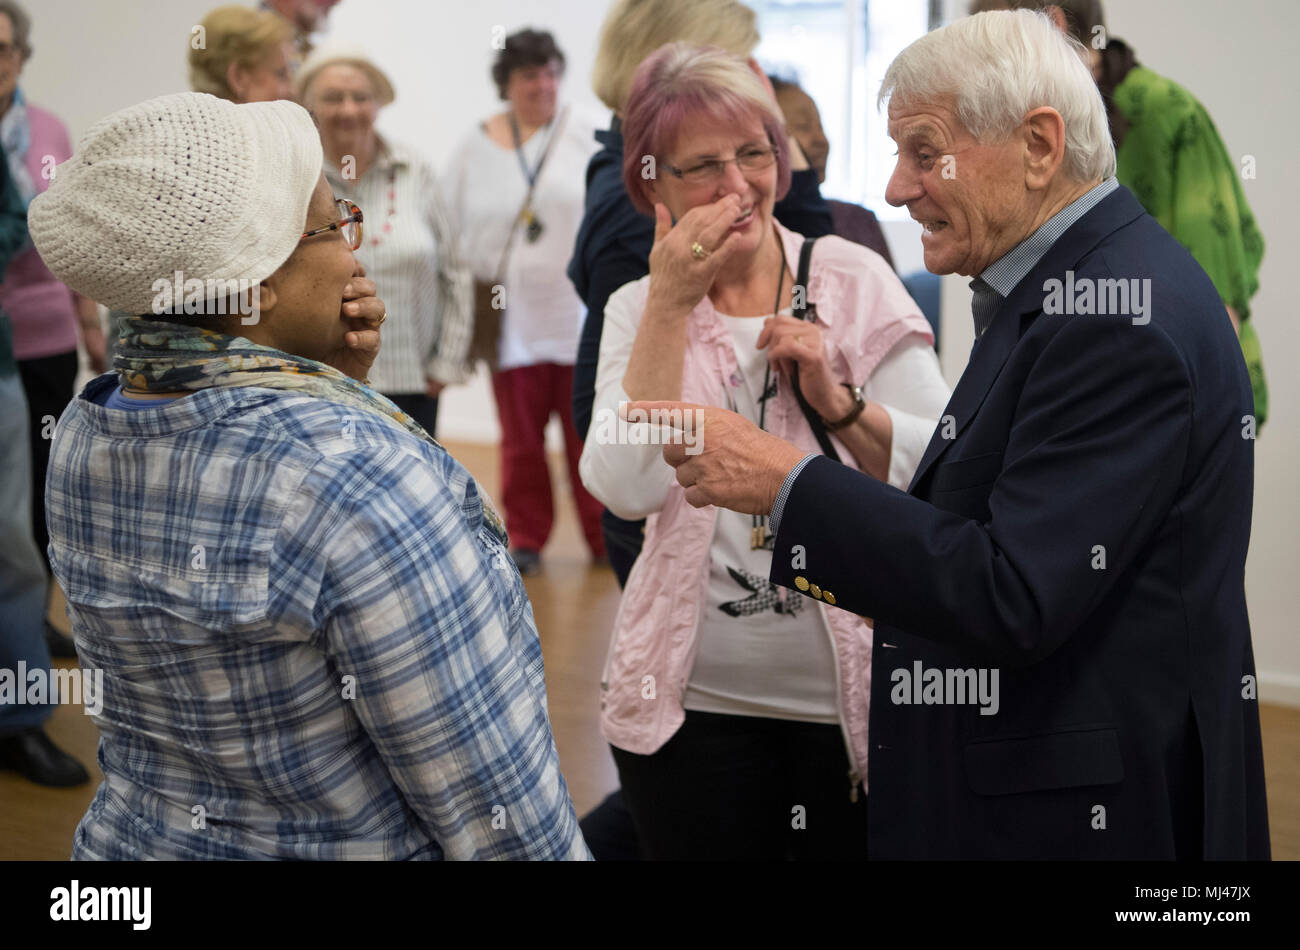 11 April 2018, Germany, Frankfurt: Elderly people take part in a special  flirting class for senior citizens. In short role-play games senior citizens  are learning how to open up towards people they